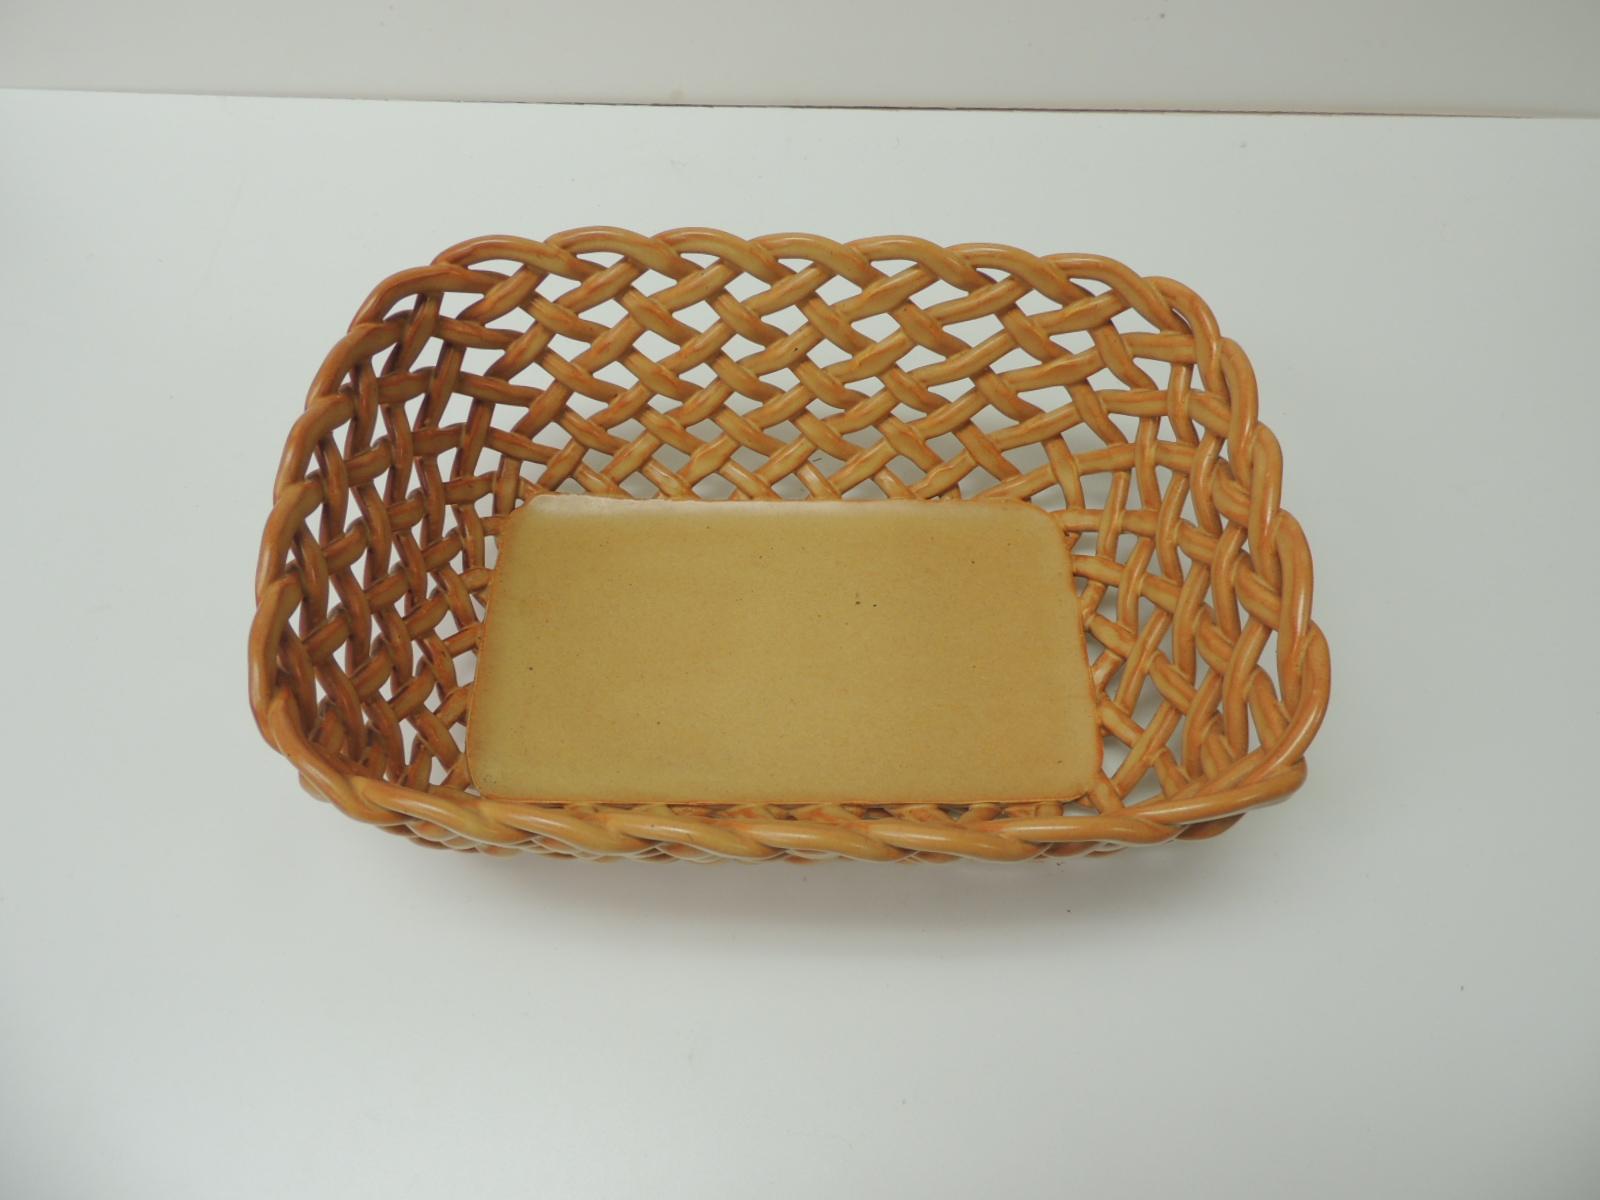 Vintage basket weave ceramic bread orange Italian basket
Vintage basket weave ceramic bread basket with orange lattice work and hand painted. Open-word design from Bassano, Italy (stamped Primogi.)
Size: 8 x 11 x 4.5.
 